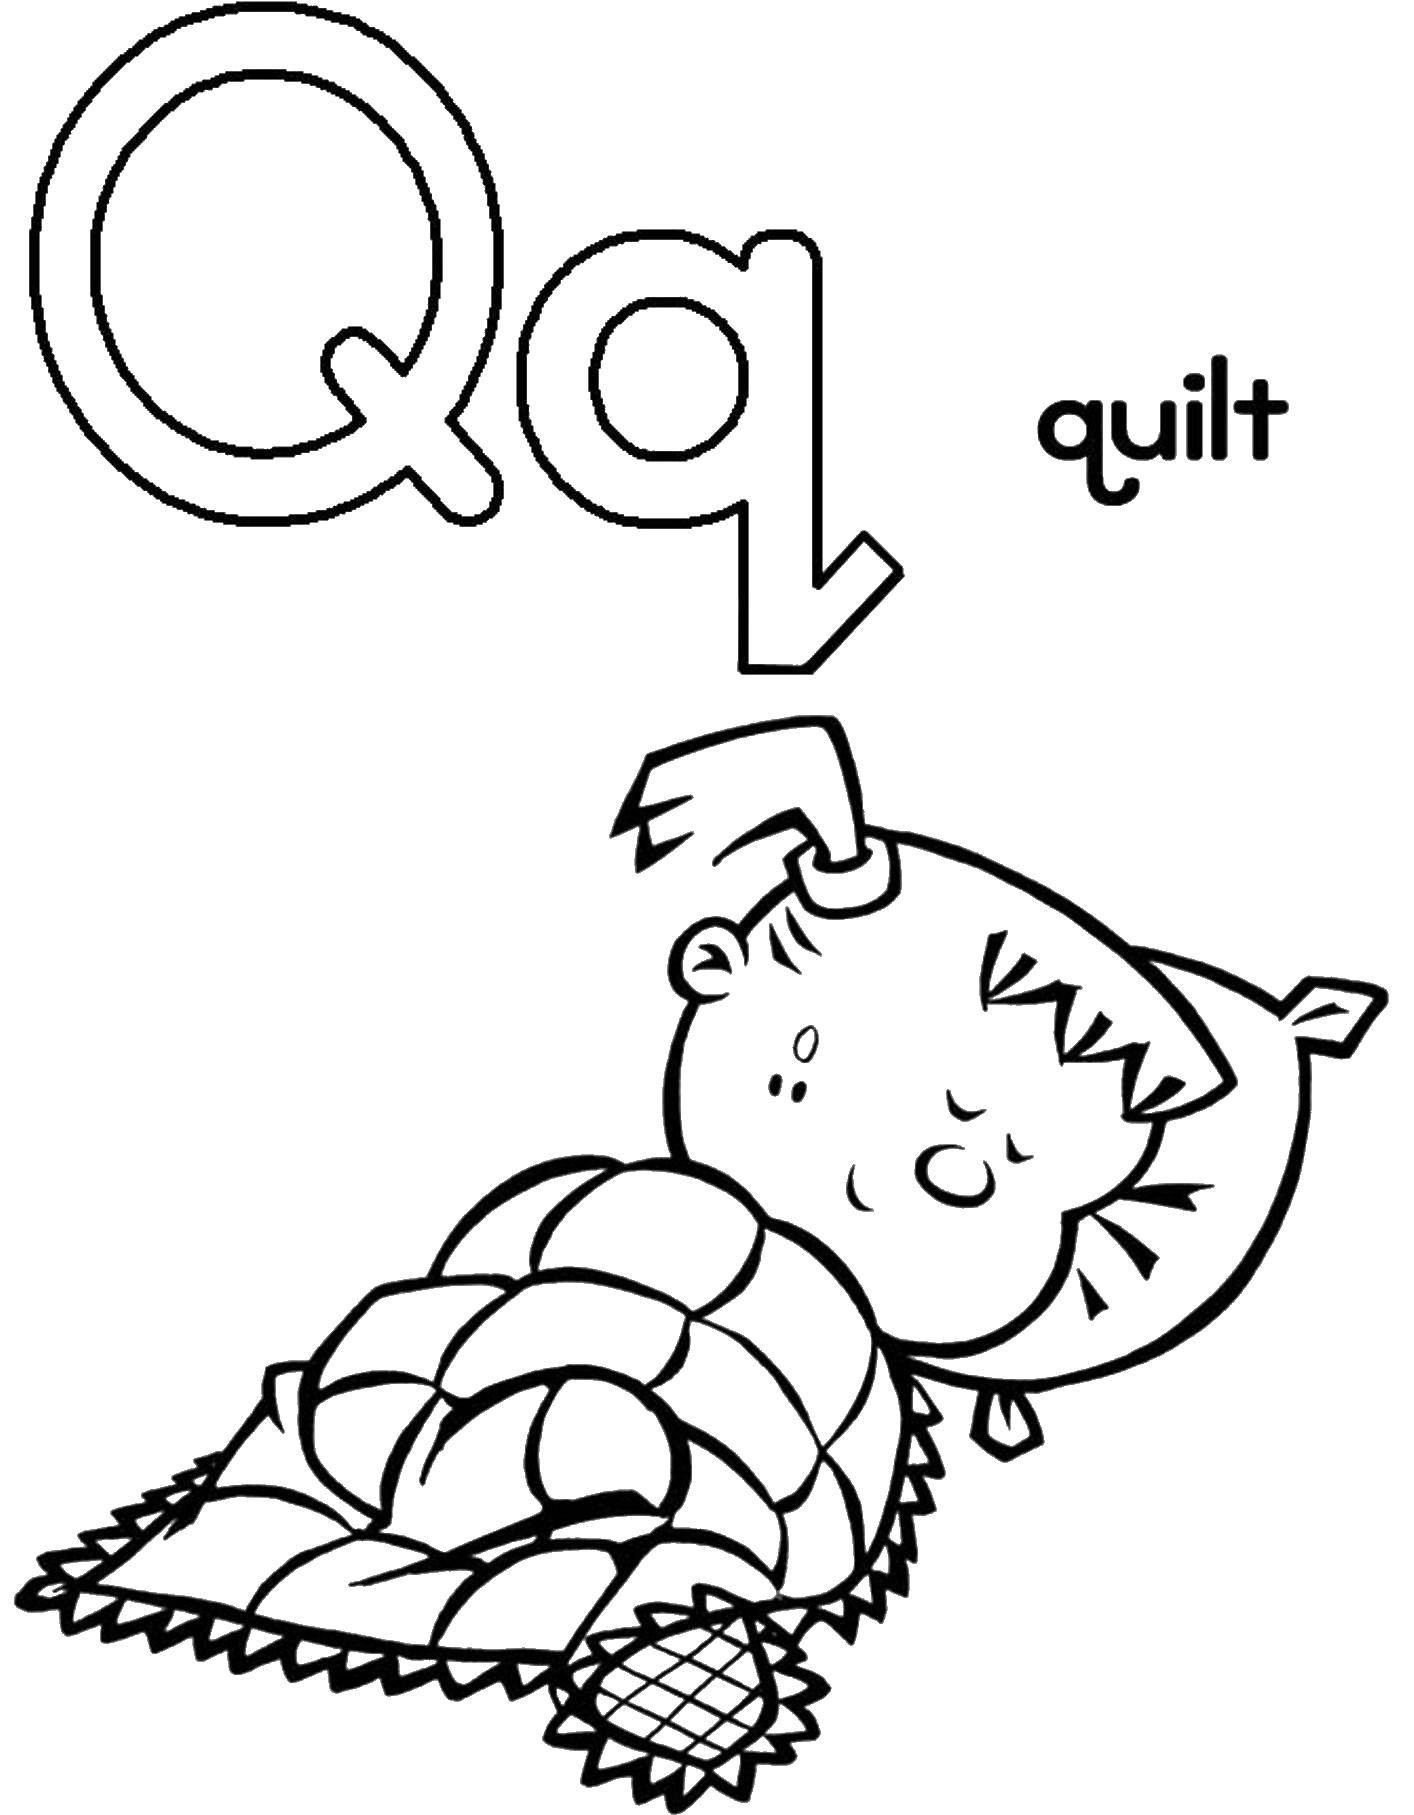 Coloring Comforter. Category coloring. Tags:  quilts.